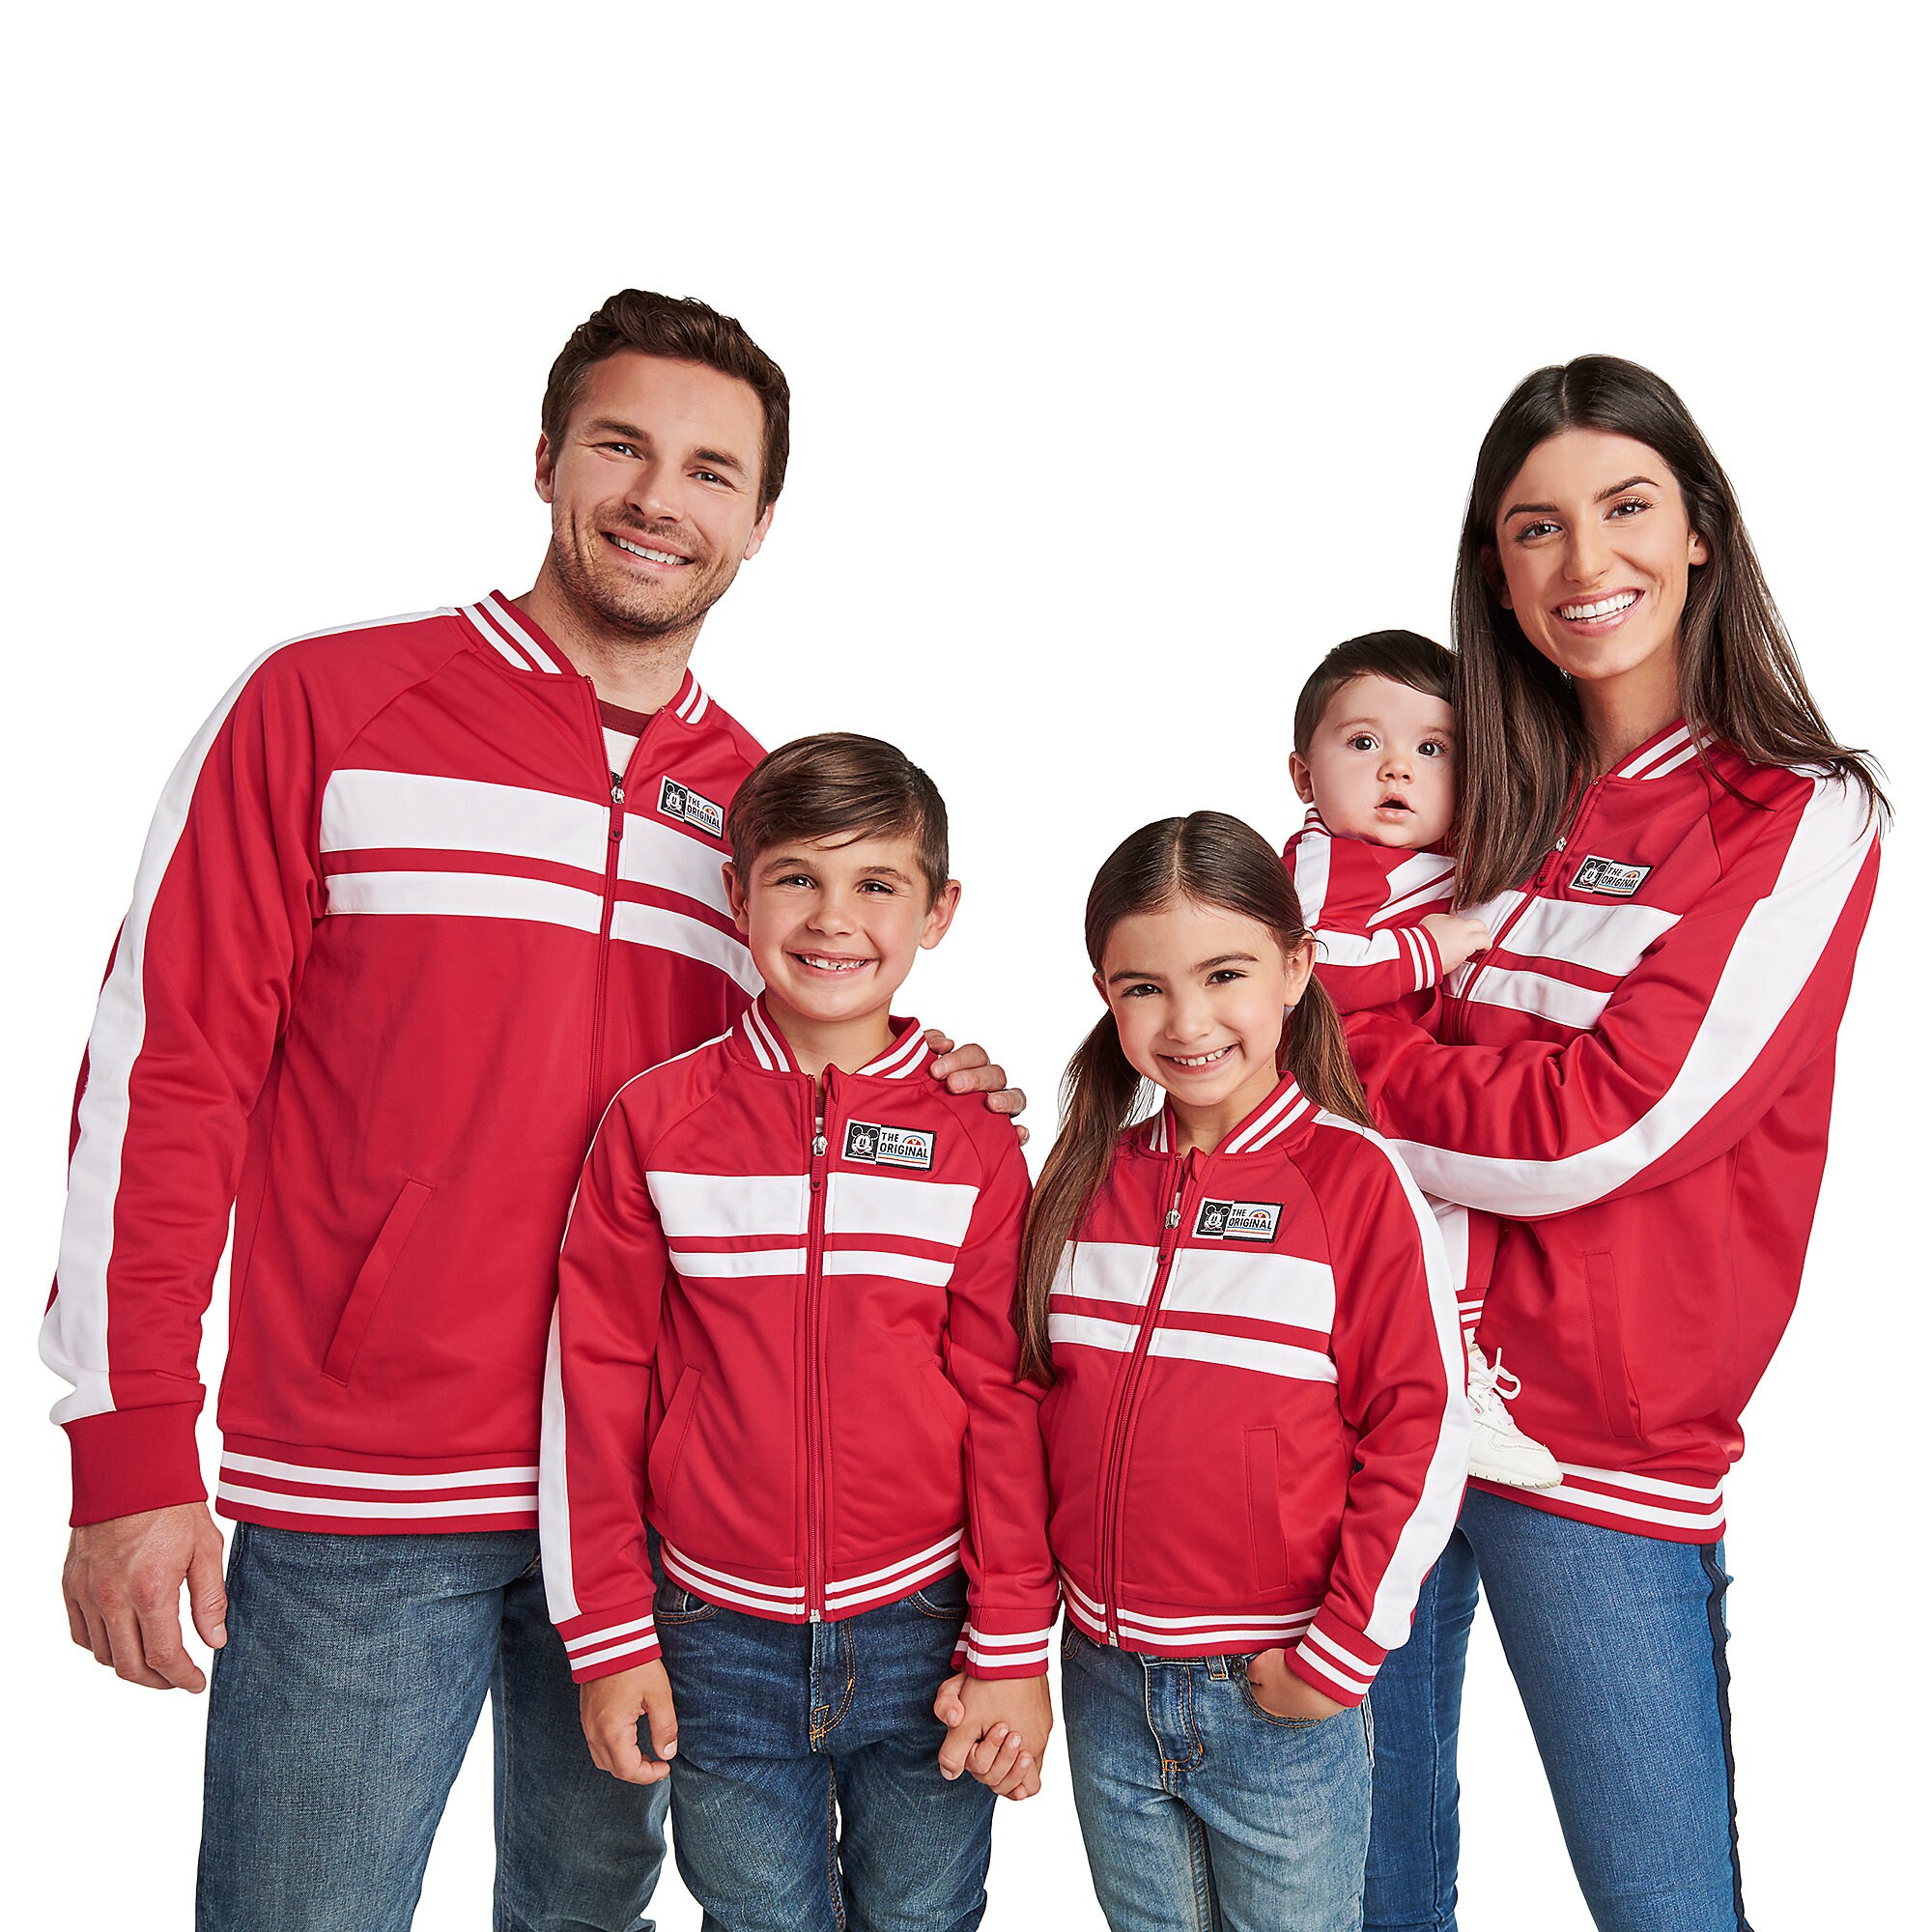 Mickey Mouse Track Jacket for Adults